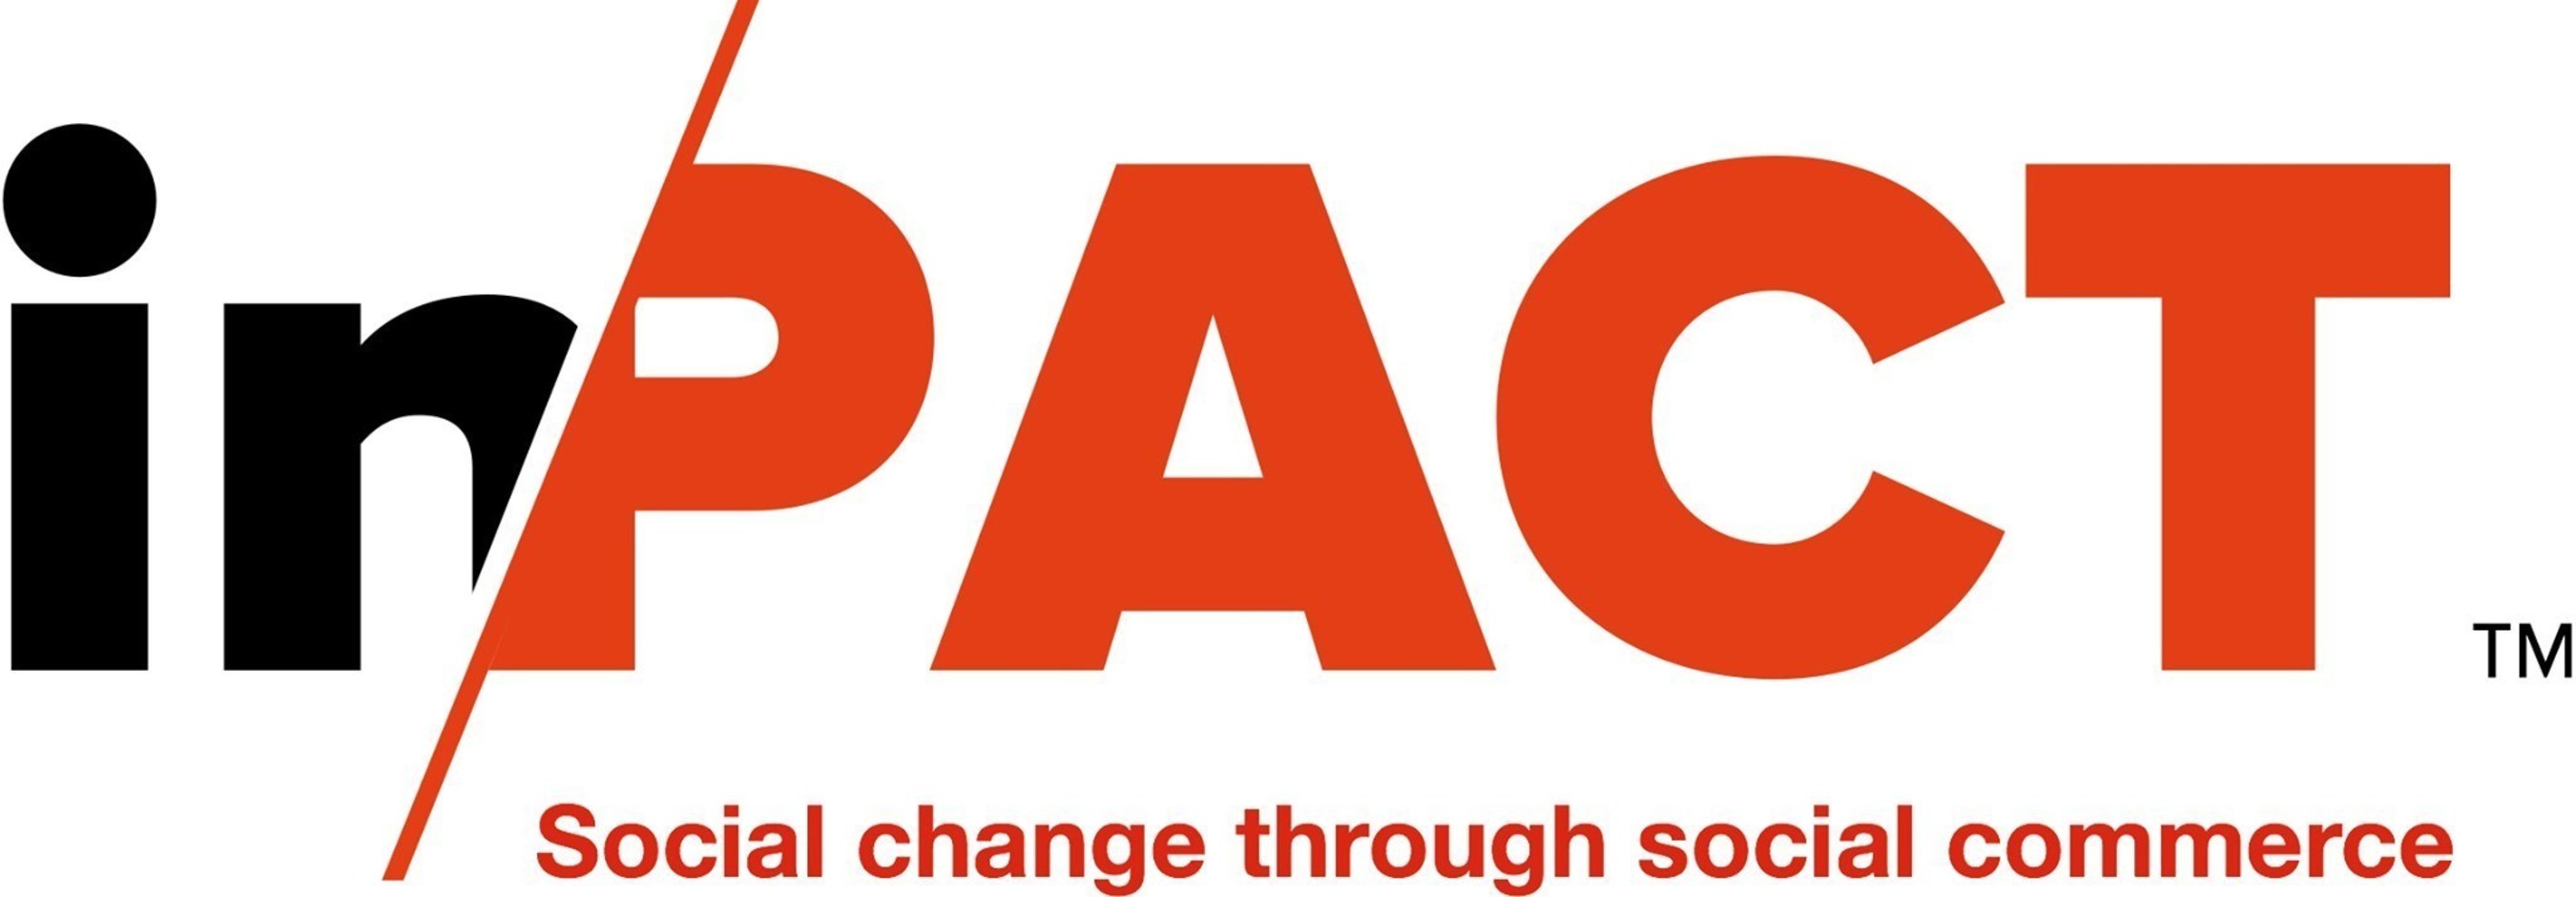 in/PACT has introduced the world's first global purpose activation platform that connects brands to their customers, employees and other stakeholders through "people empowered giving."